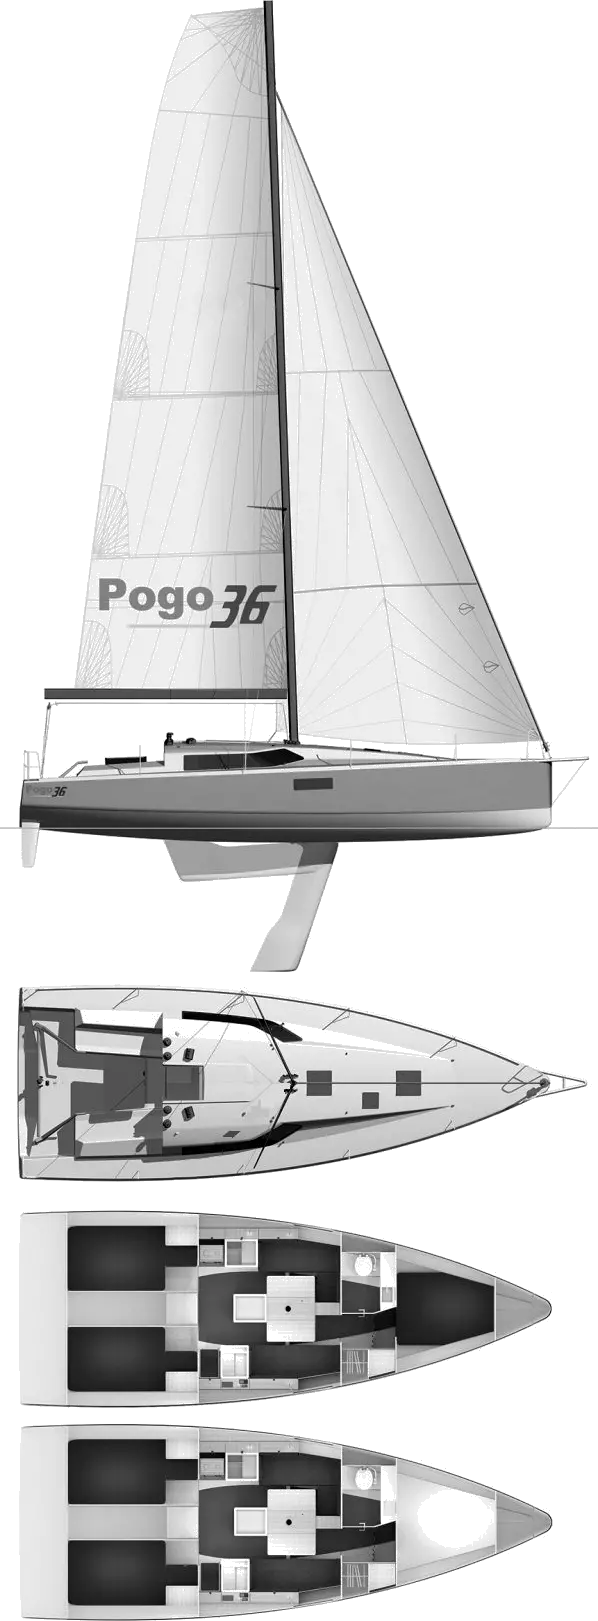 Drawing of Pogo 36